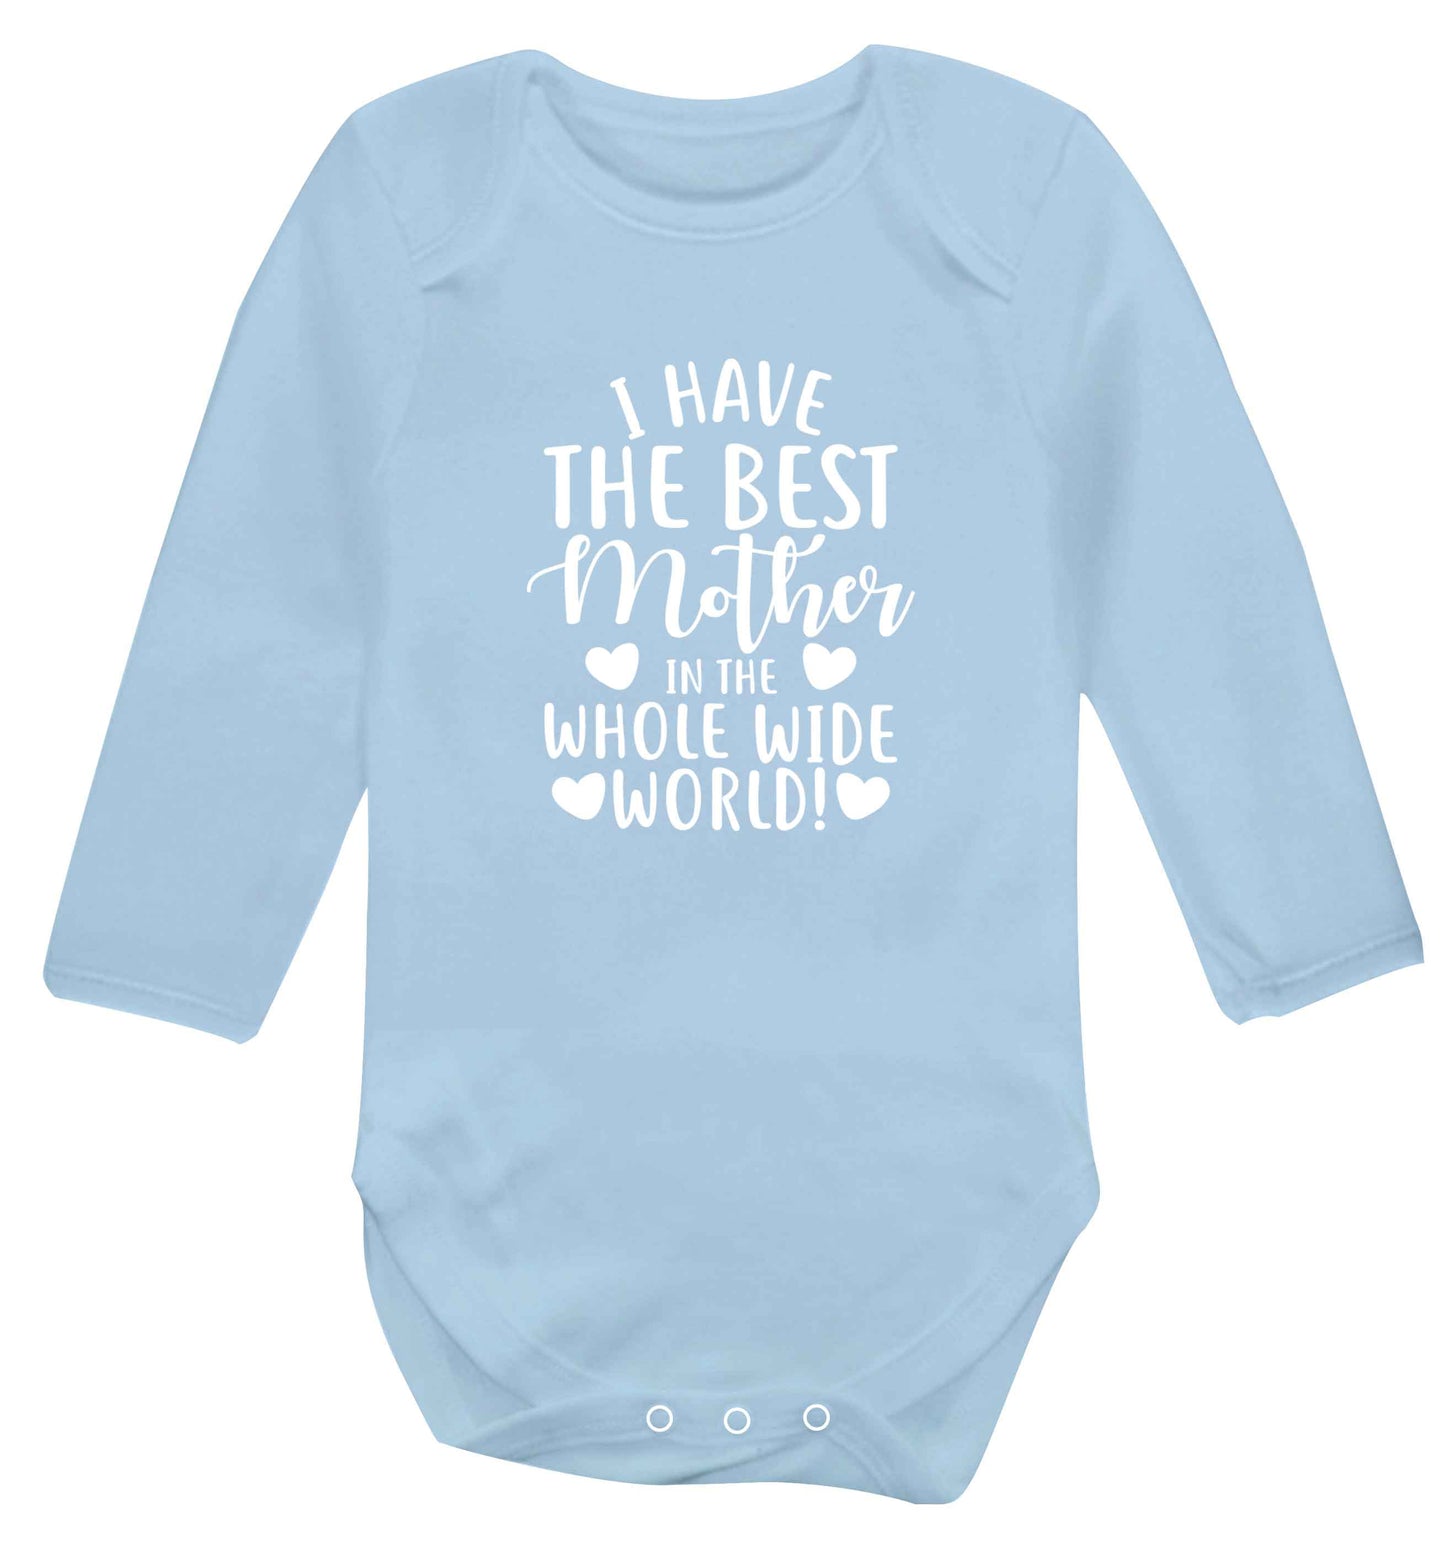 I have the best mother in the whole wide world baby vest long sleeved pale blue 6-12 months